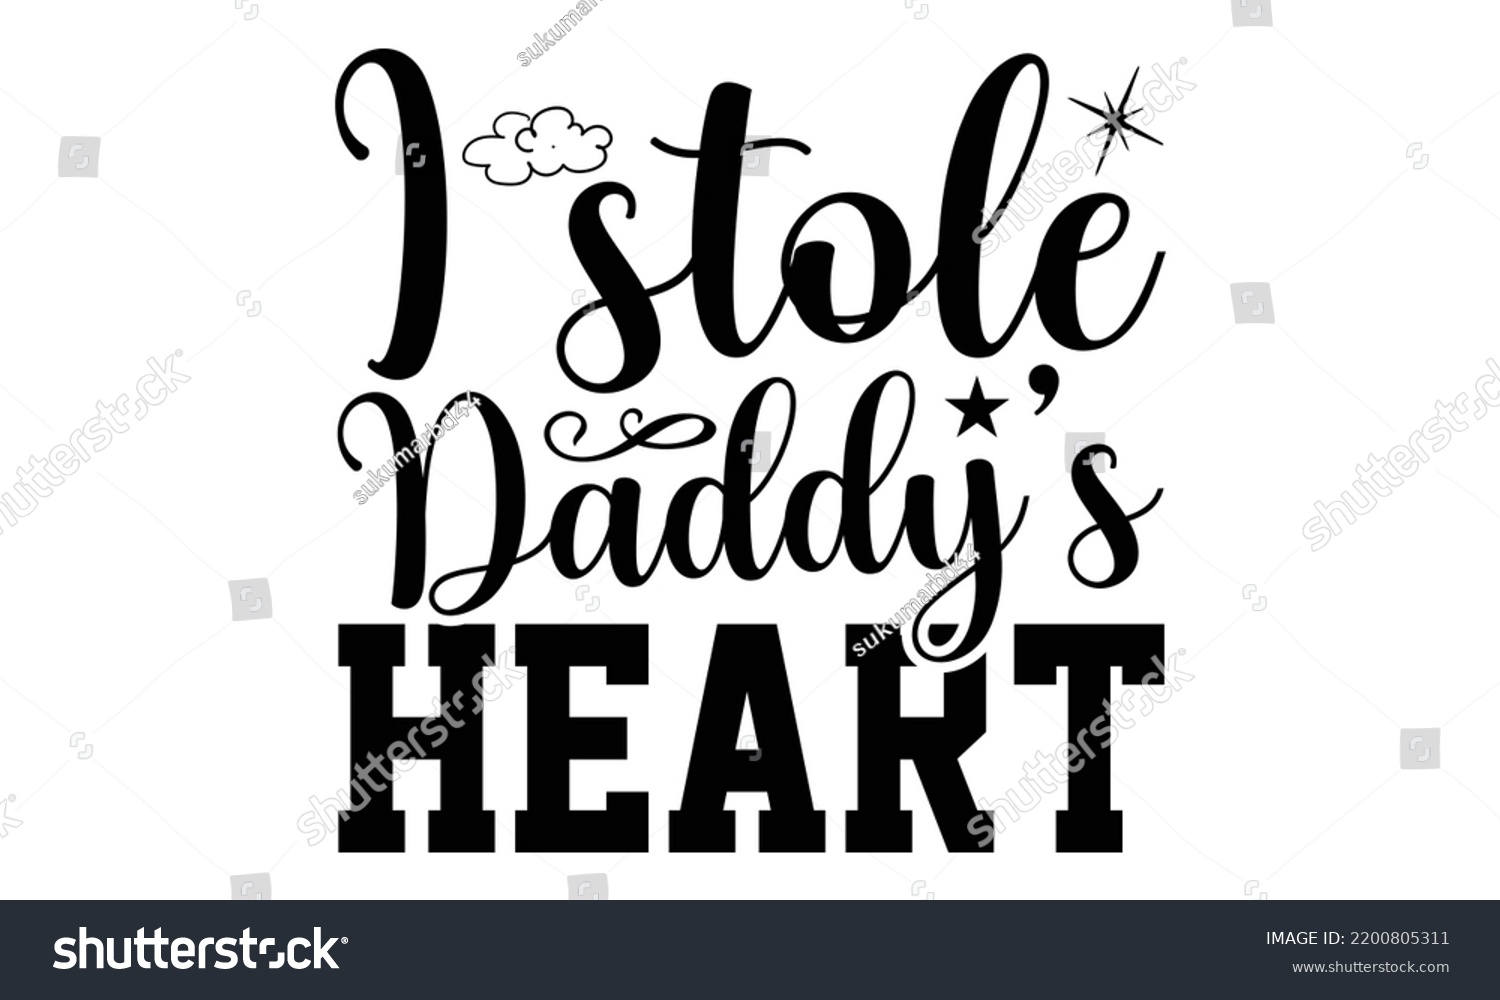 SVG of I Stole Daddy’s Heart - Valentine's Day t shirt design, Calligraphy graphic design, Hand written vector t shirt design, lettering phrase isolated on white background, svg Files for Cutting svg